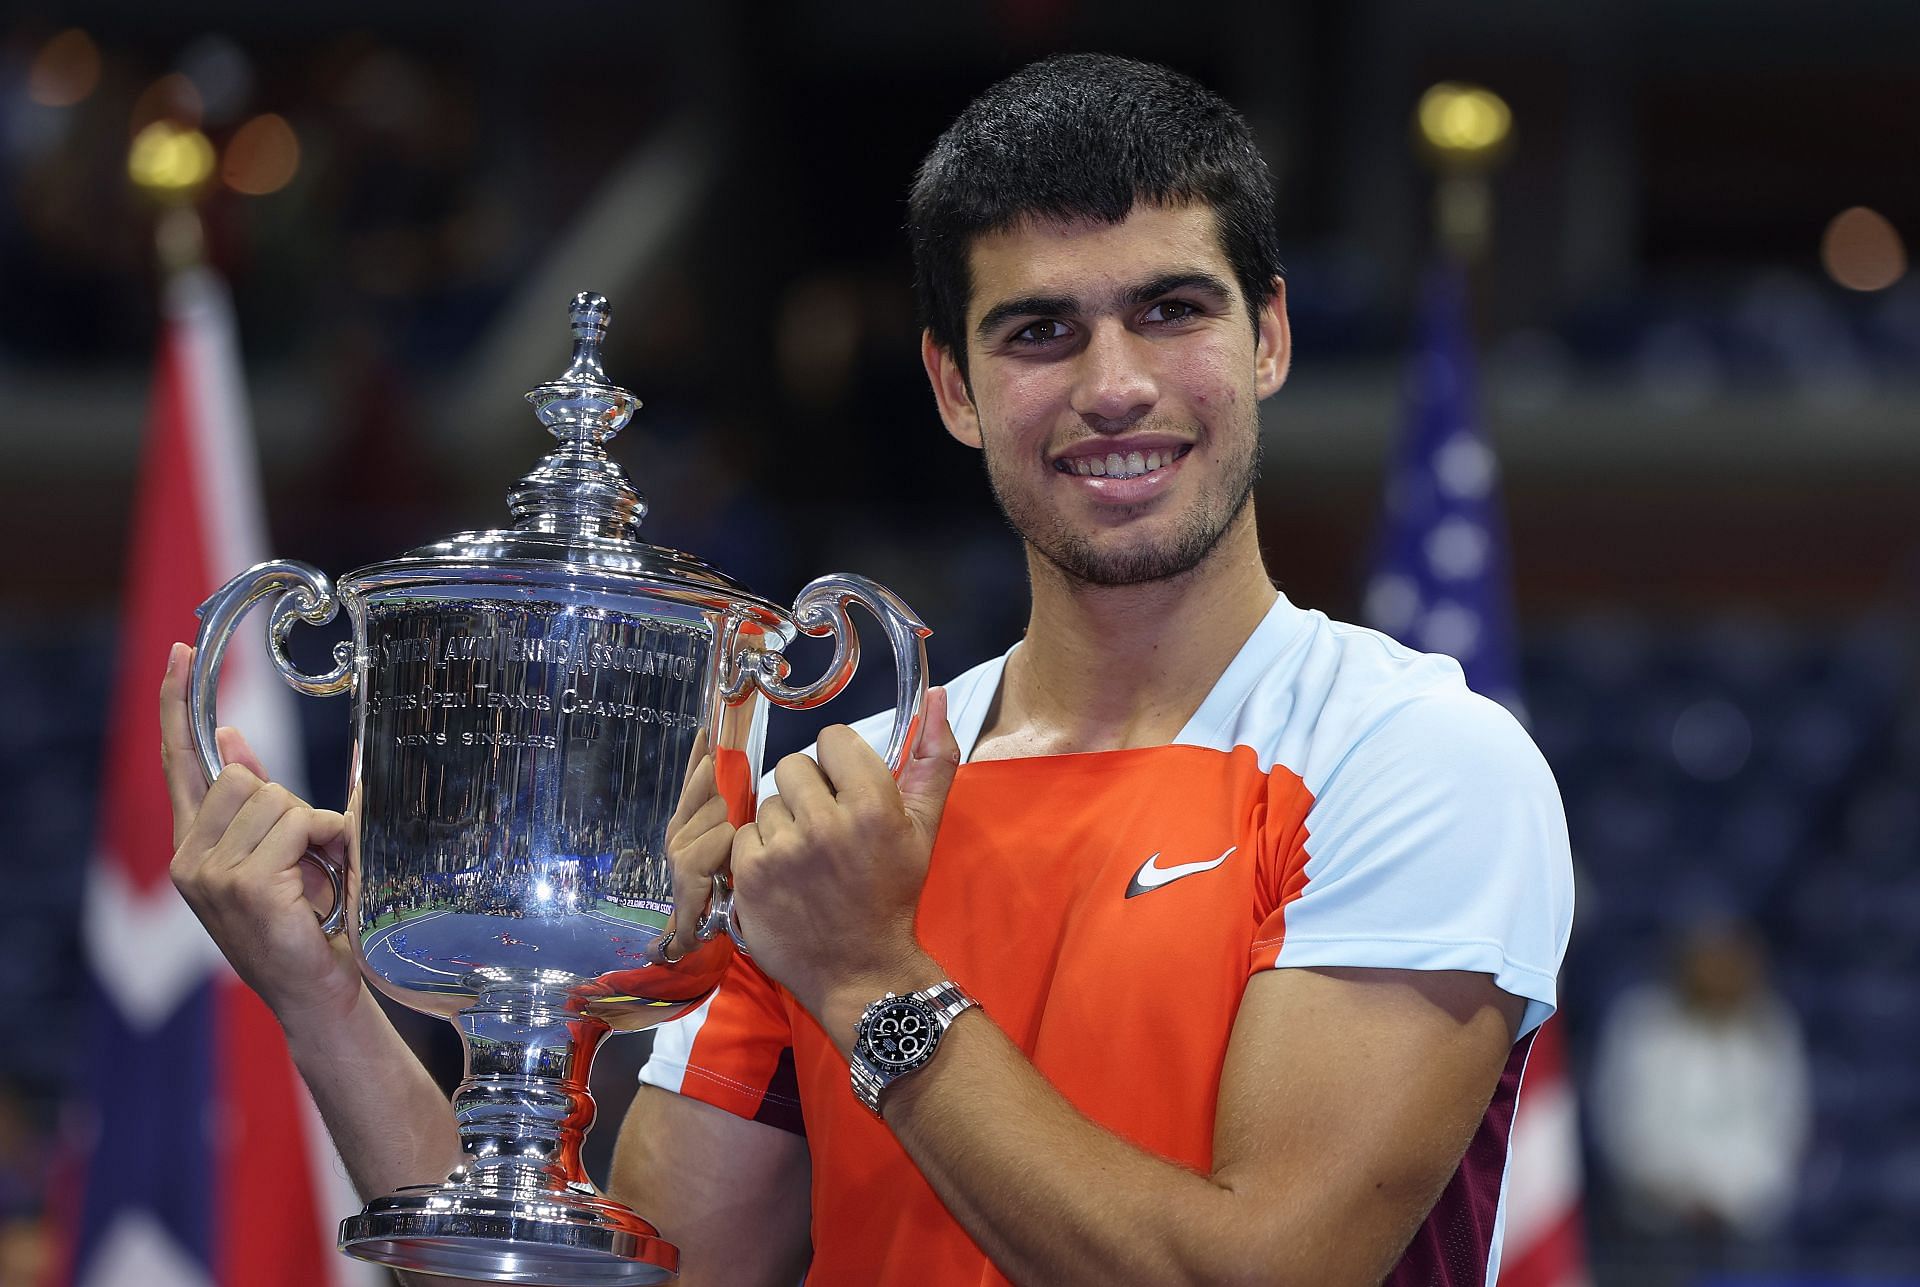 Carlos Alcaraz celebrates with the winners trophy after defeating Casper Ruud at the 2022 US Open